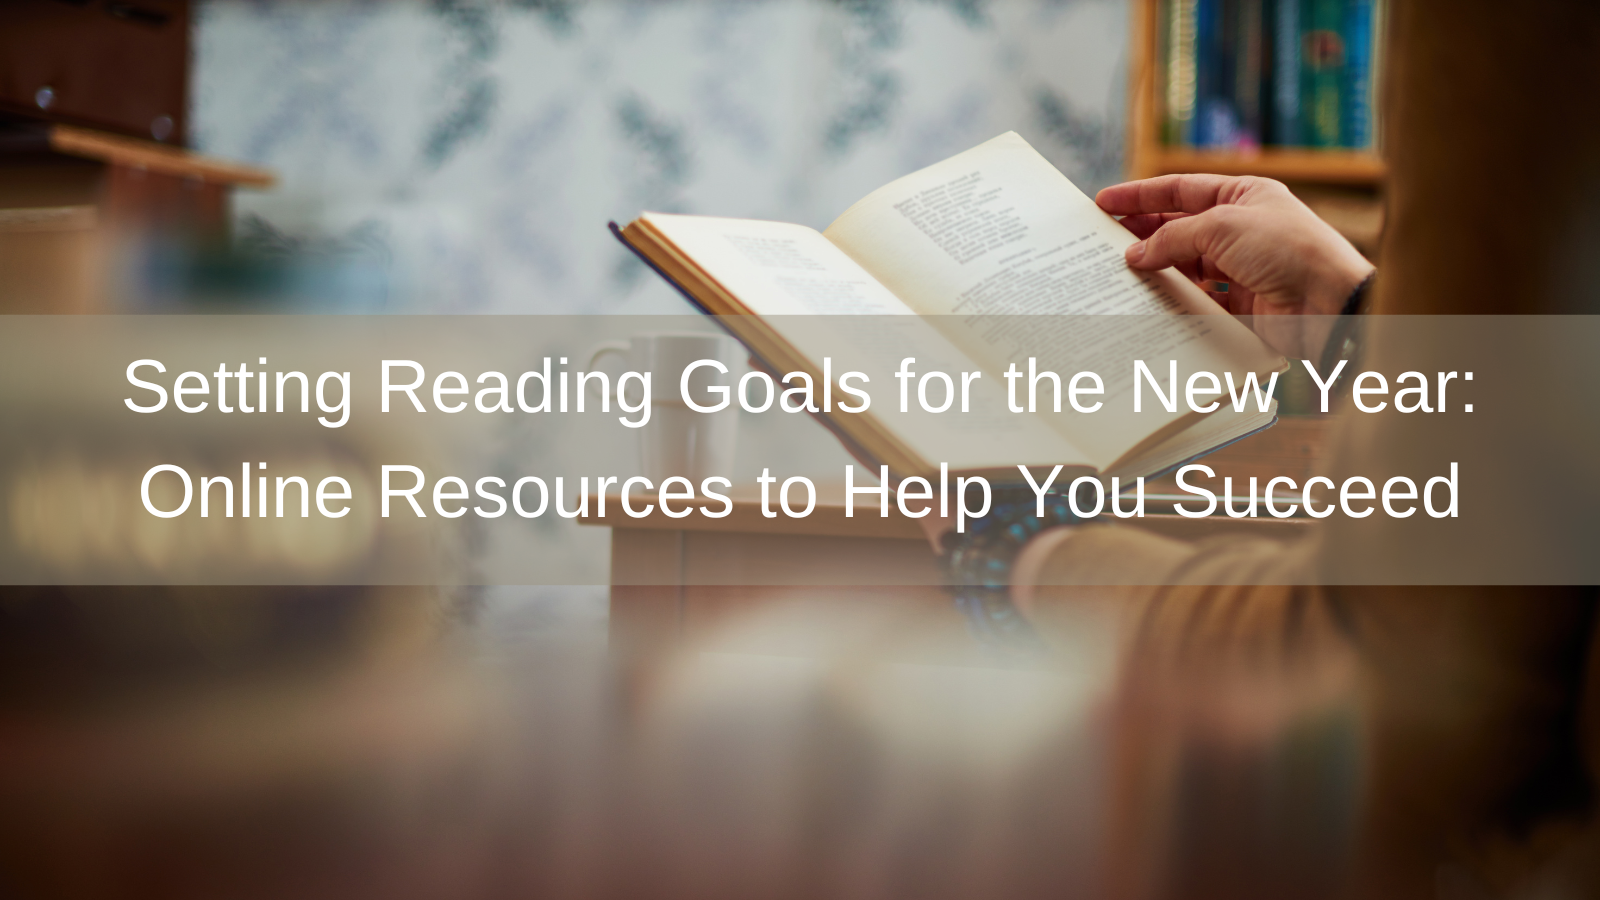 Setting Reading Goals for the New Year